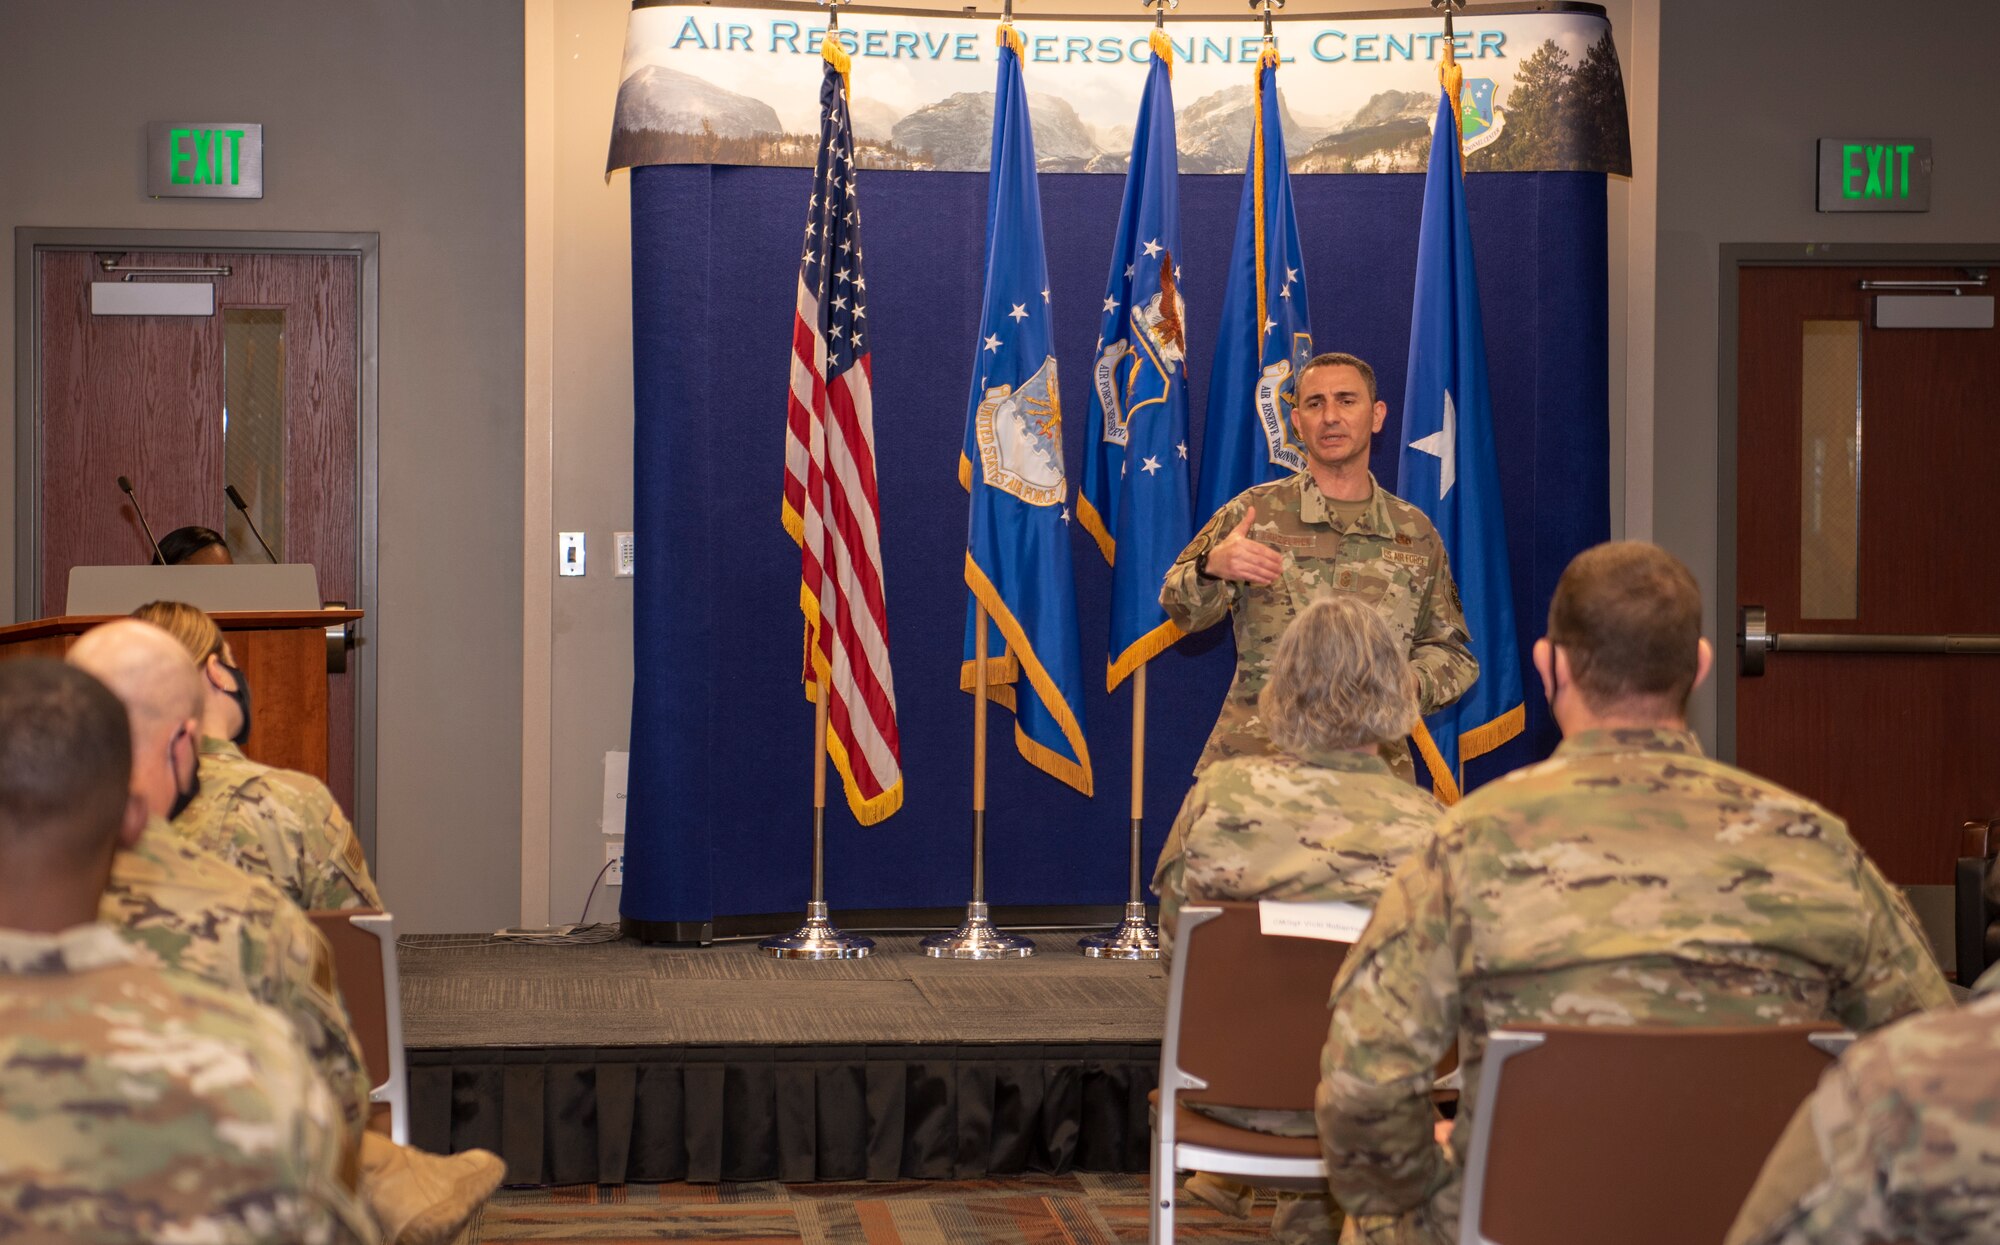 Command Chief Master Sergeant of Air Mobility Command  Brian Kruzelnick speaks to members of Headquarters Air Reserve Personnel Center on Buckley Space Force Base, Colo., Dec. 15, 2021.